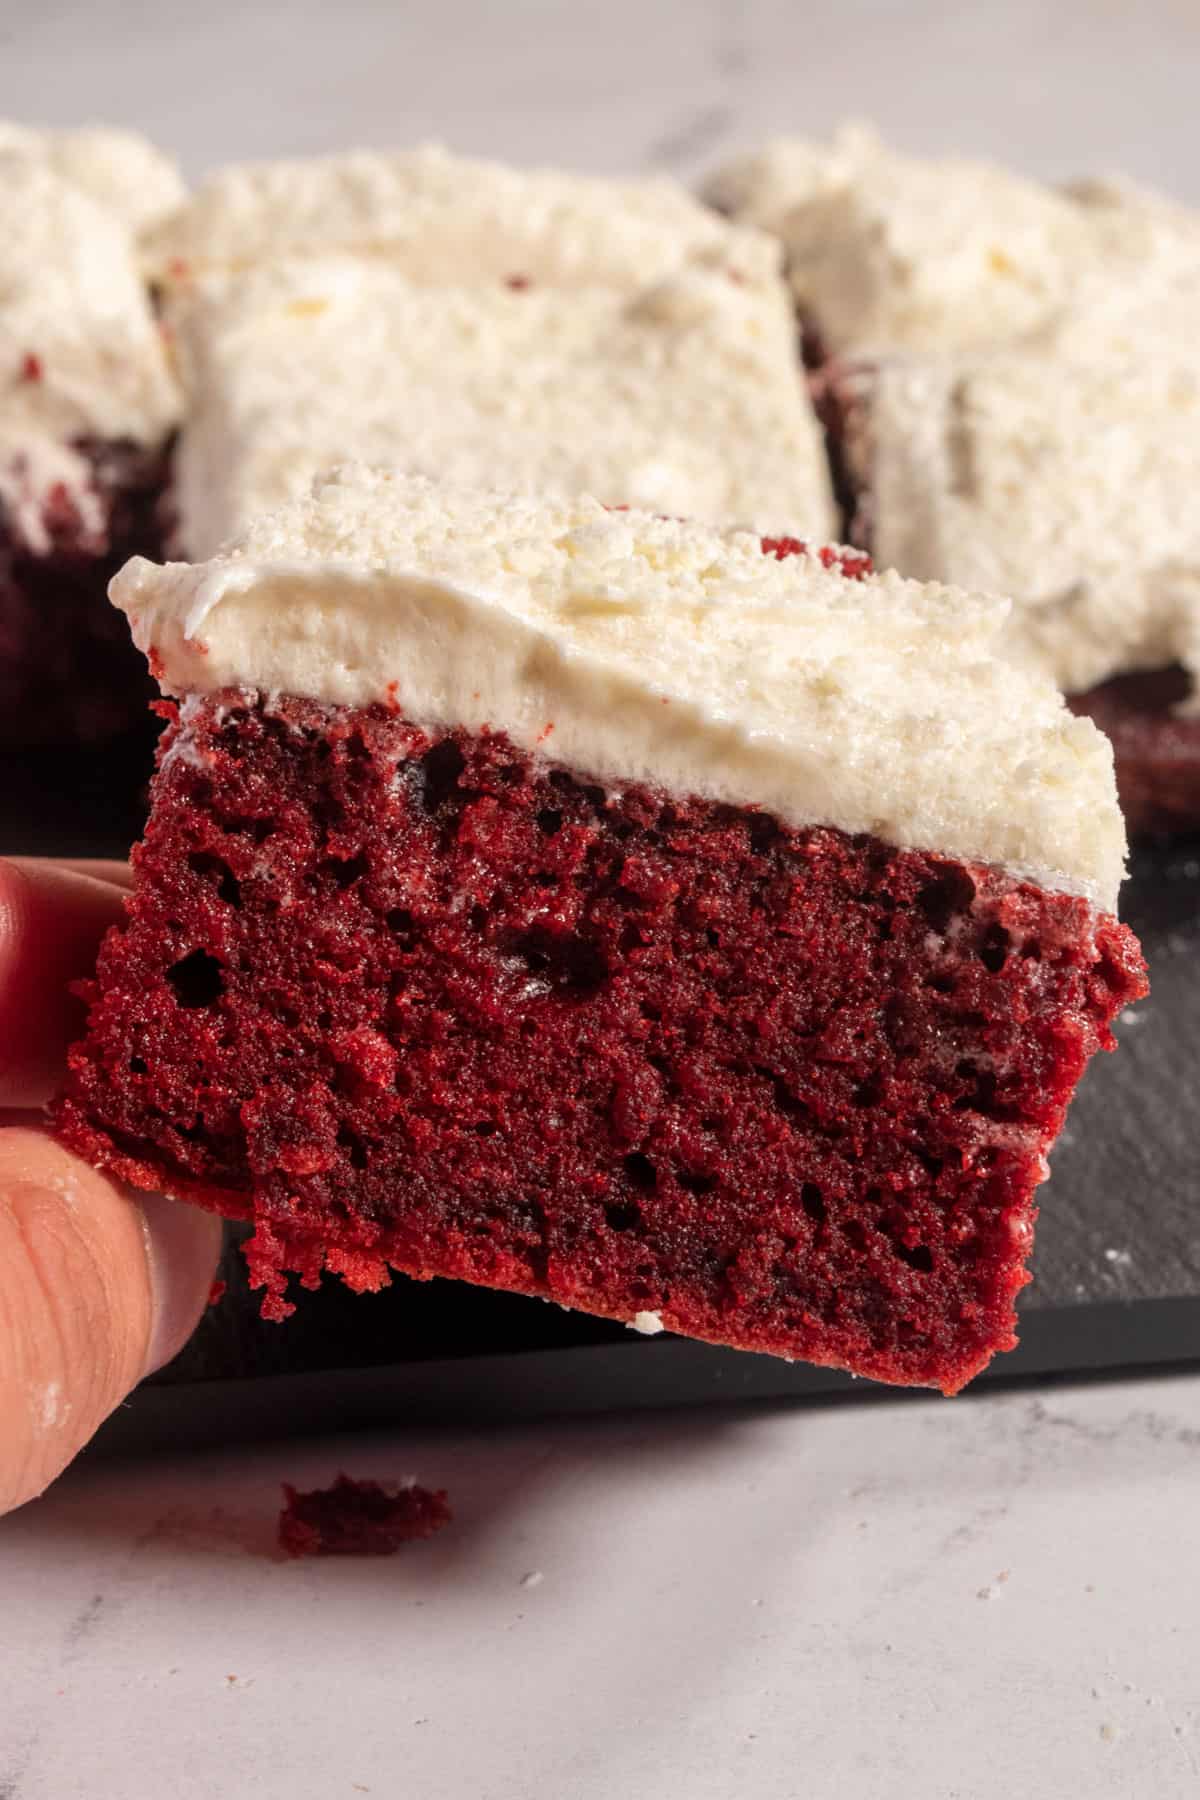 One of my vegan red velvet bars being held towards the camera. It has a thick layer of frosting on top.